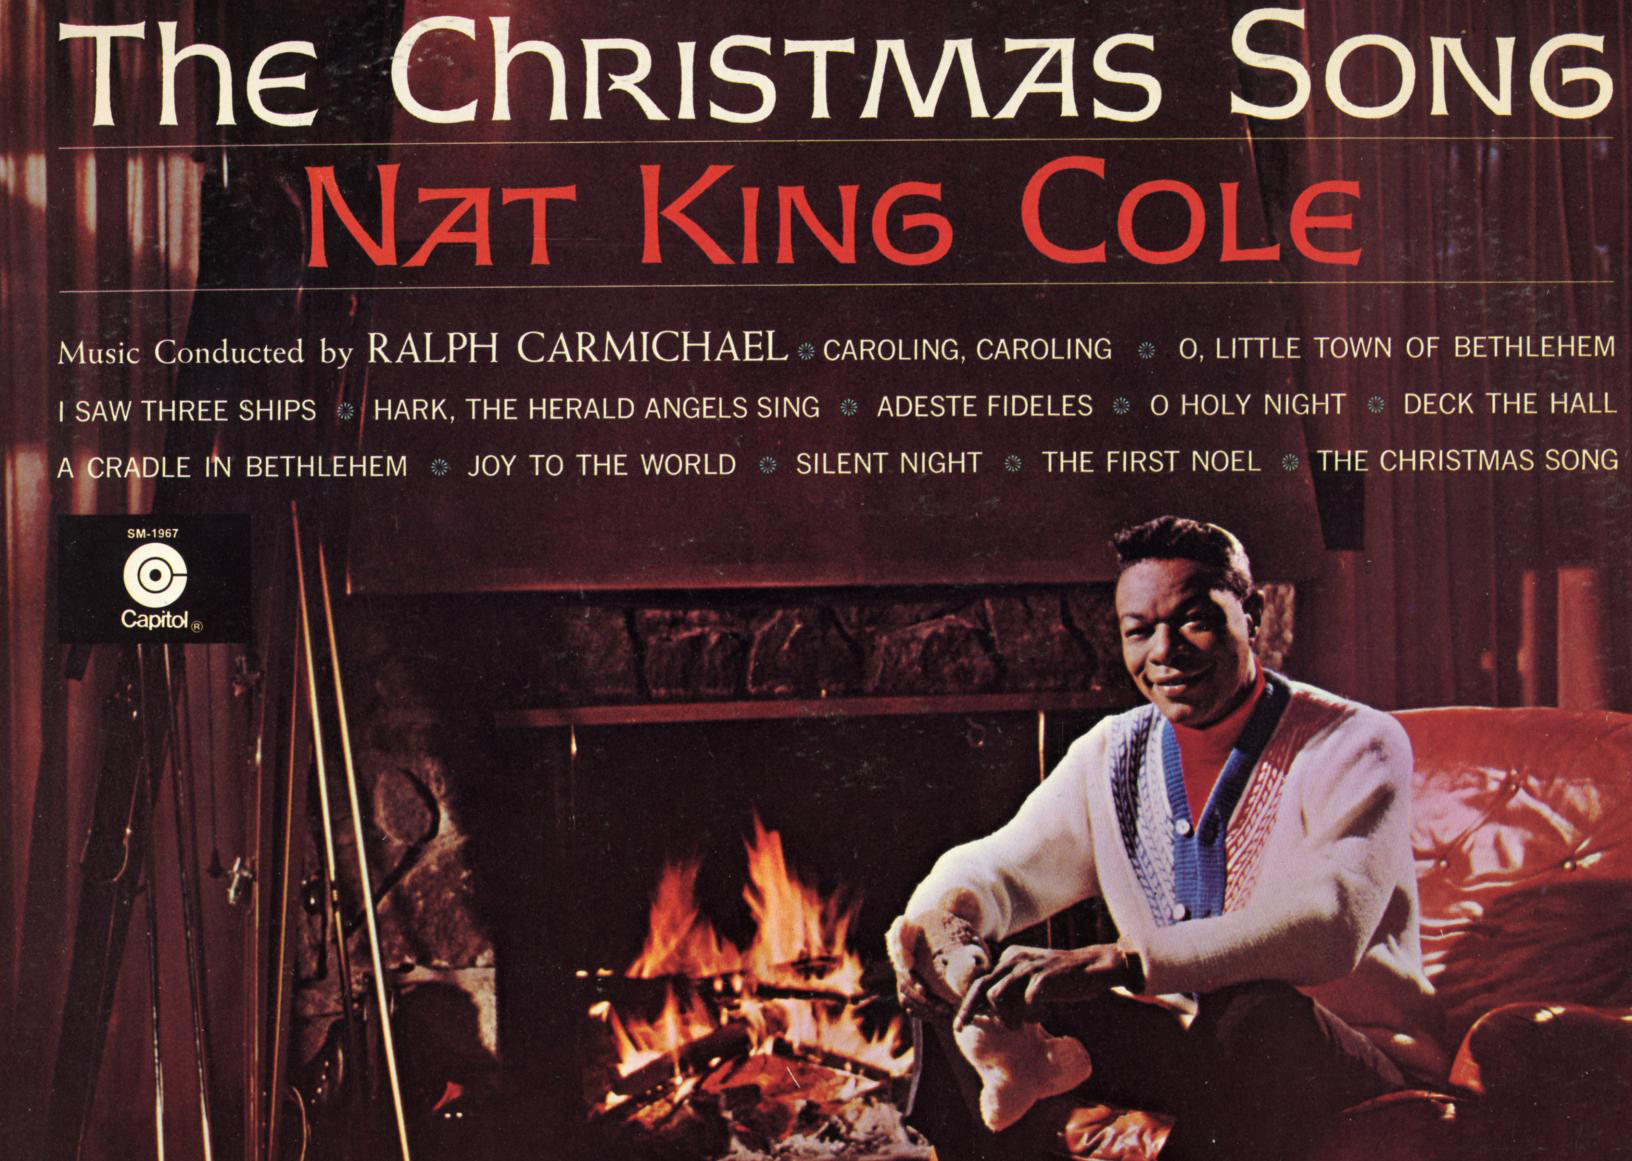 Merry Christmas from Thenublack (and Nat King Cole)